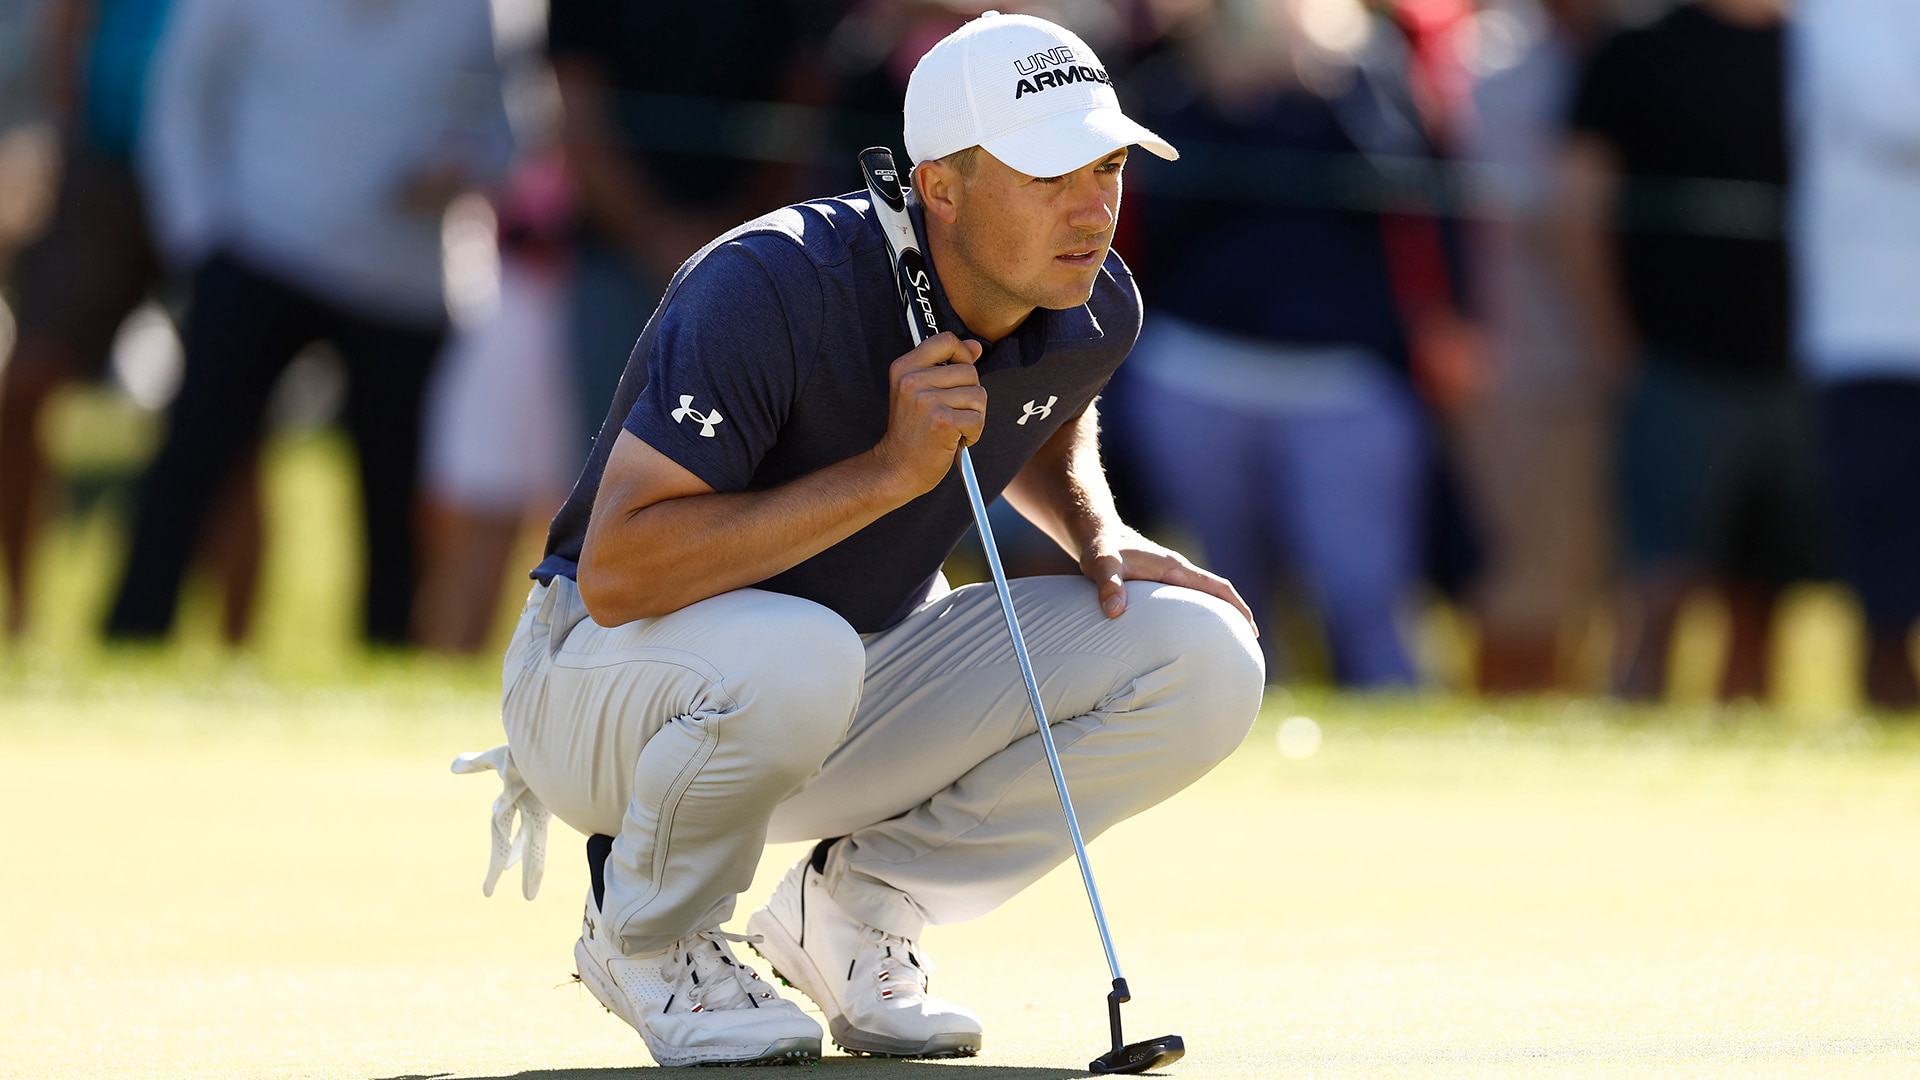 Jordan Spieth opens with 4-under 67 after making nearly 150 feet of putts